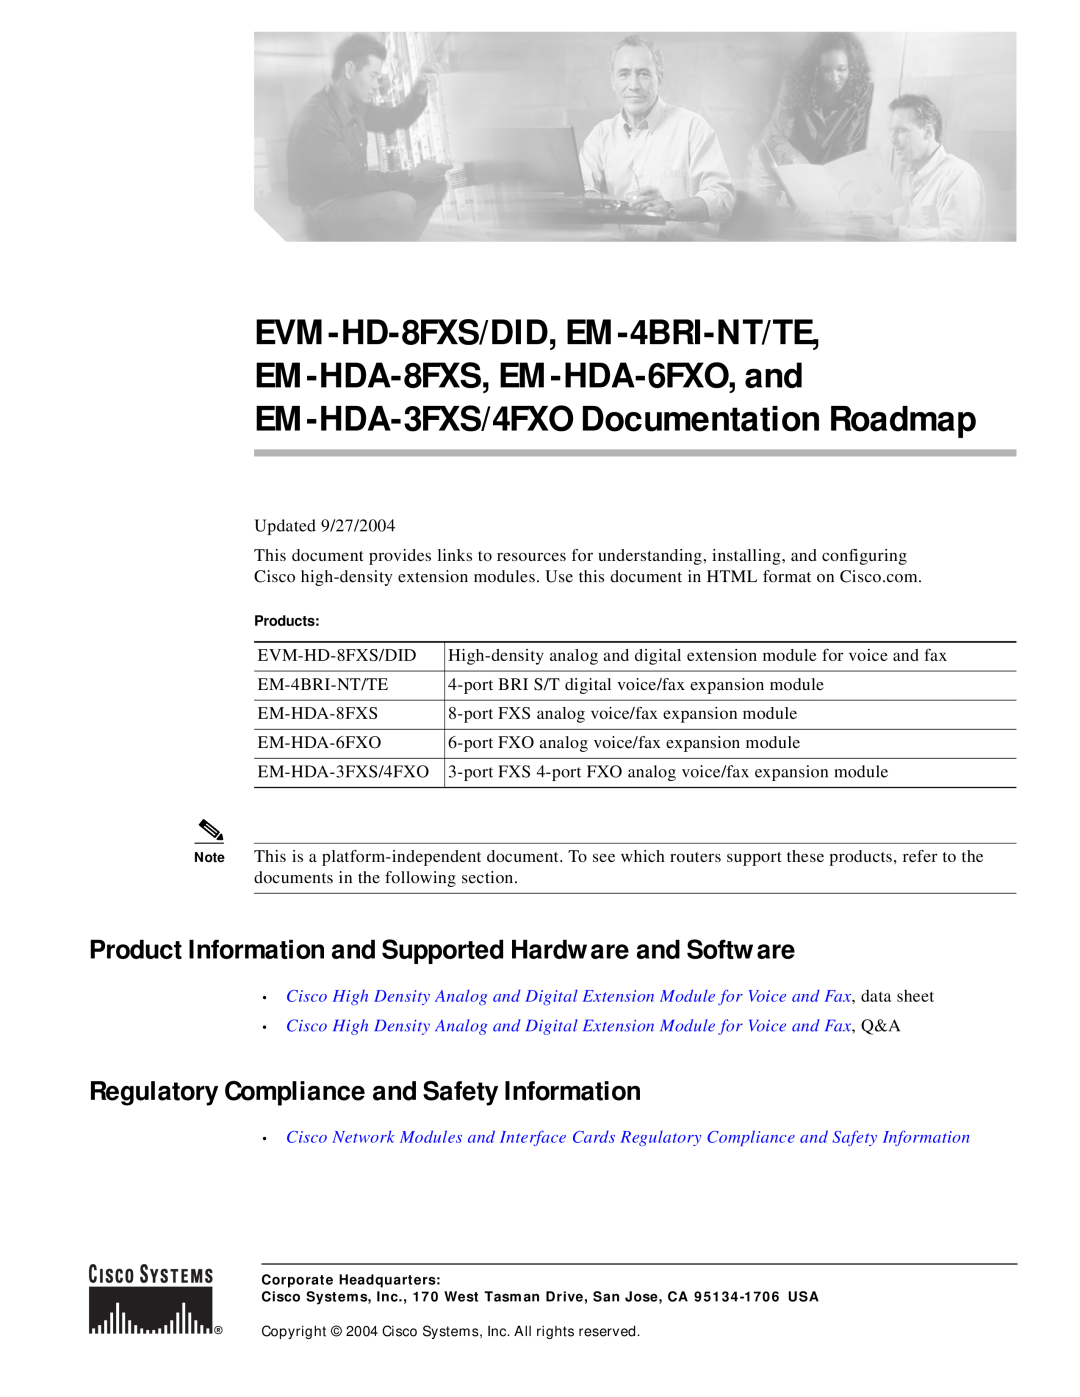 Cisco Systems EVM-HD-8FXS/DID, EM-HDA-3FXS/4FXO manual Product Information and Supported Hardware and Software, Products 